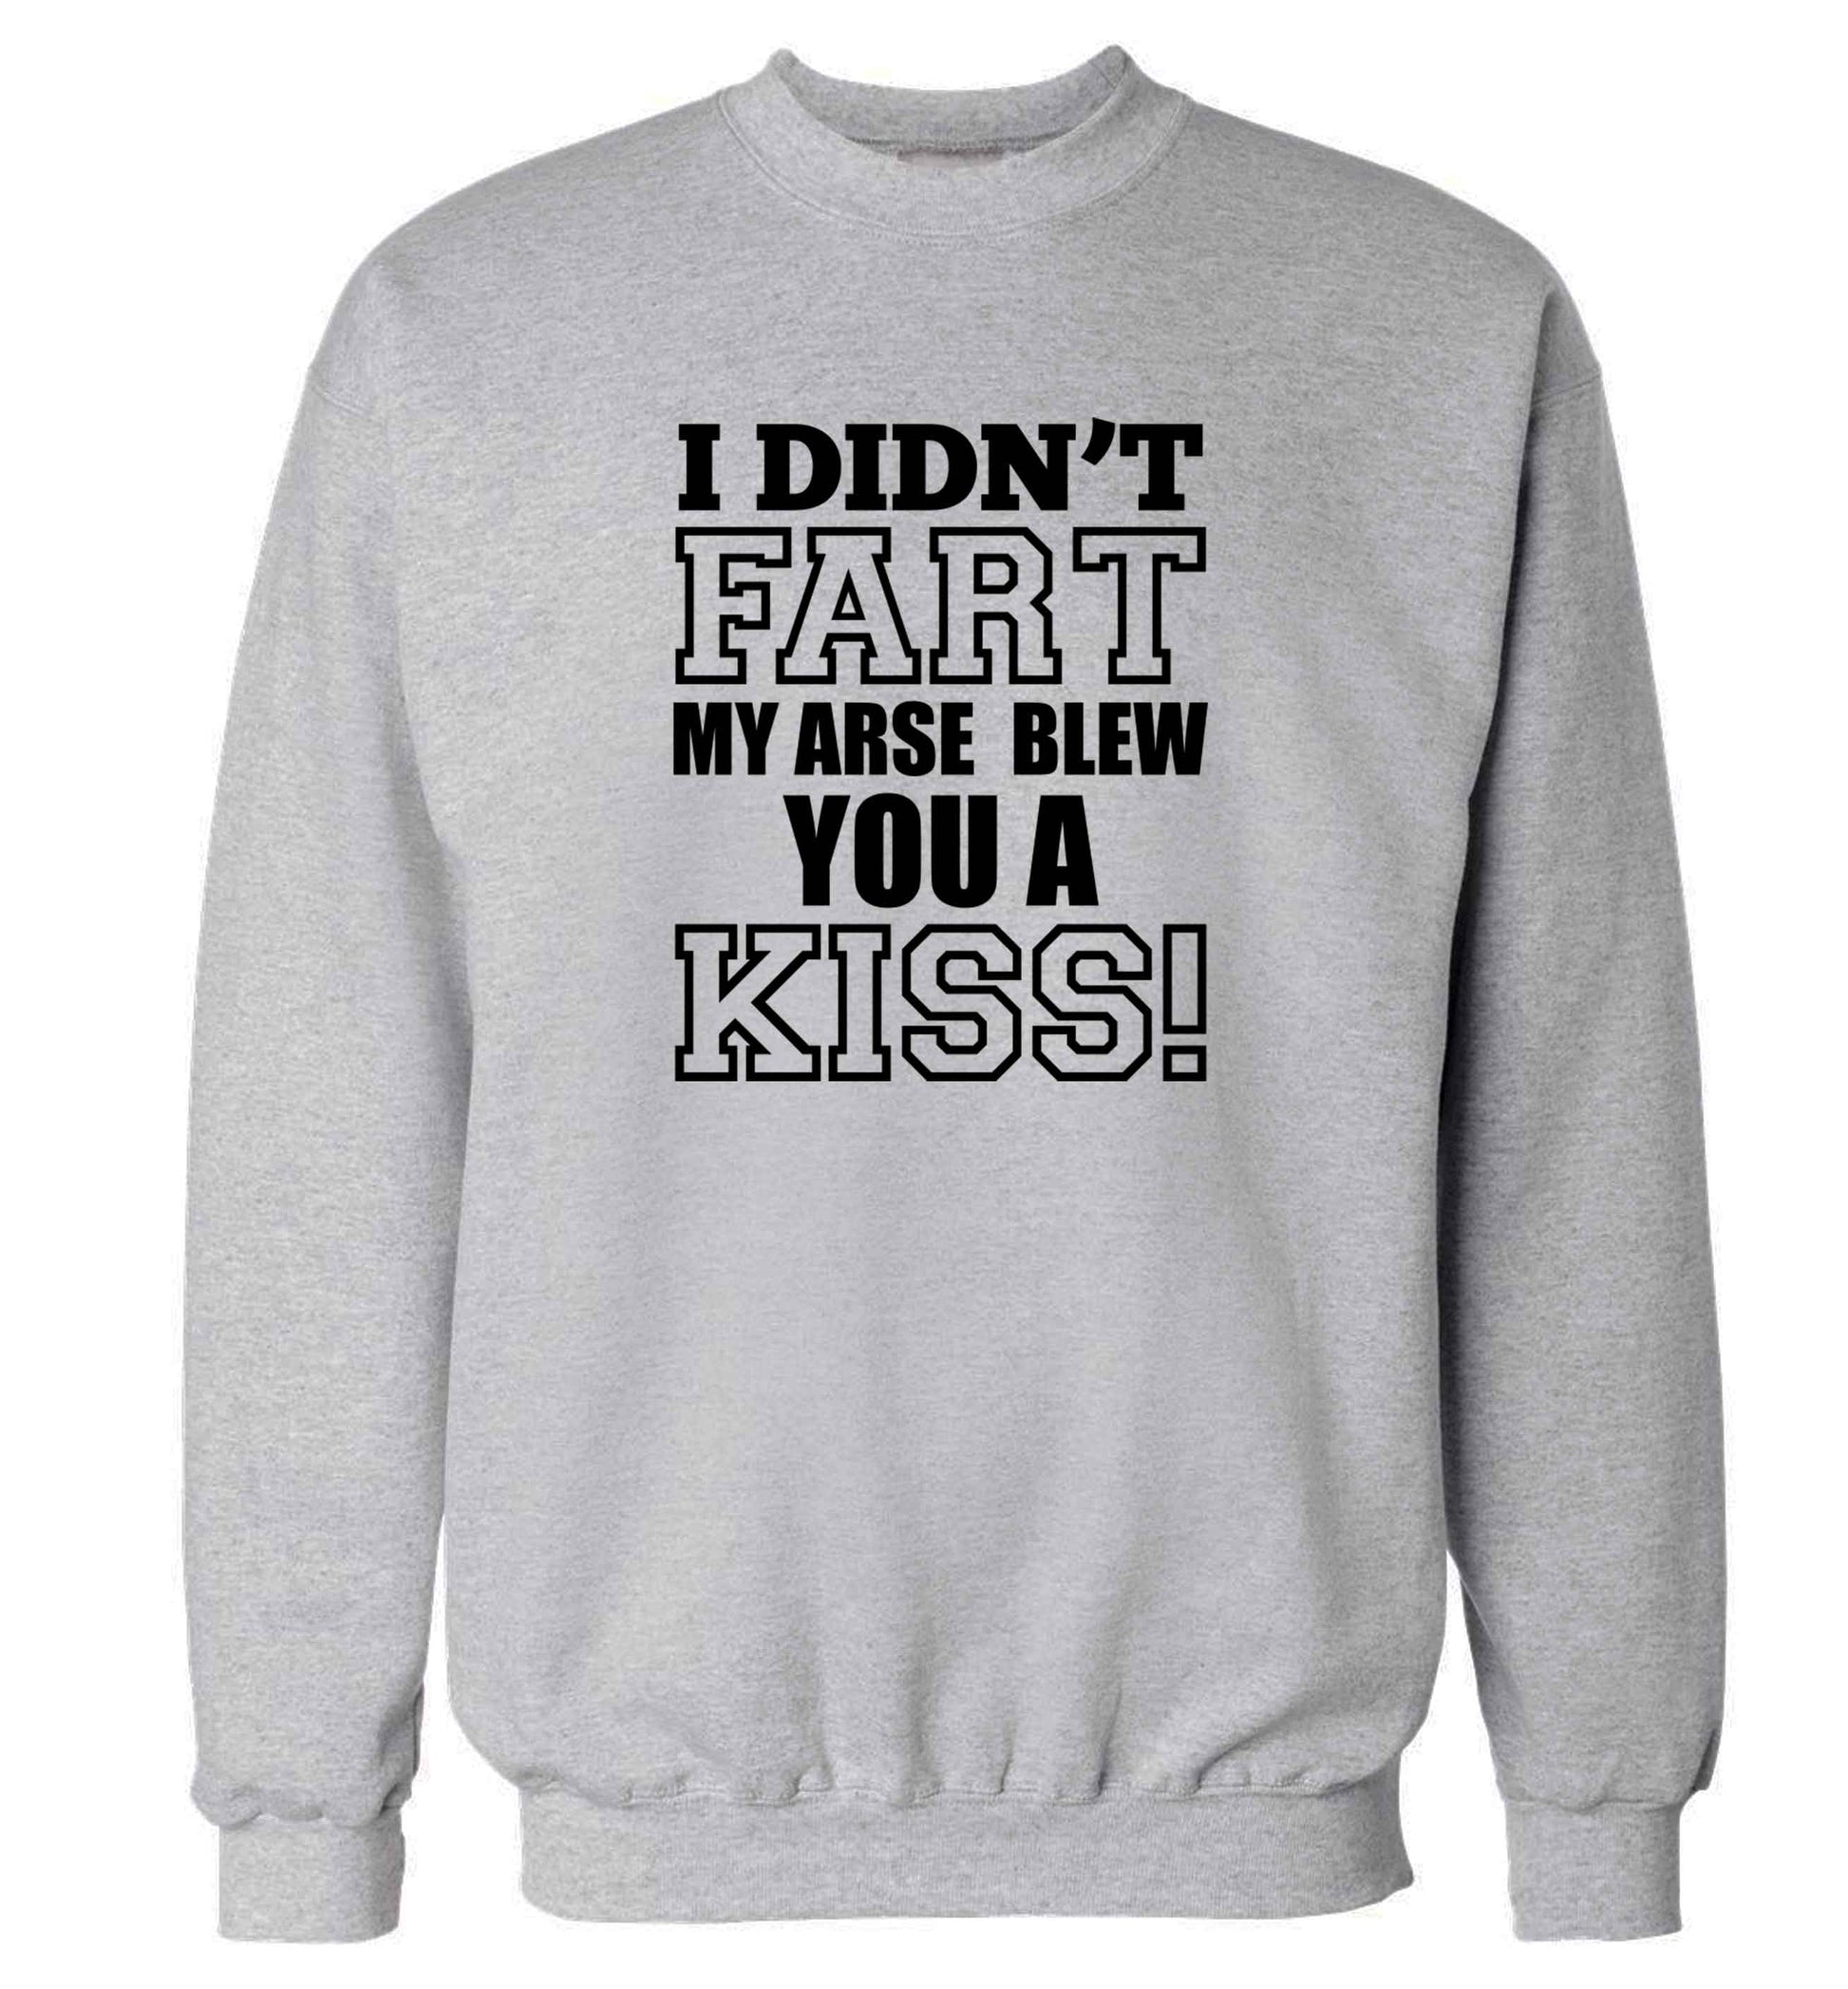 I didn't fart my arse blew you a kiss adult's unisex grey sweater 2XL